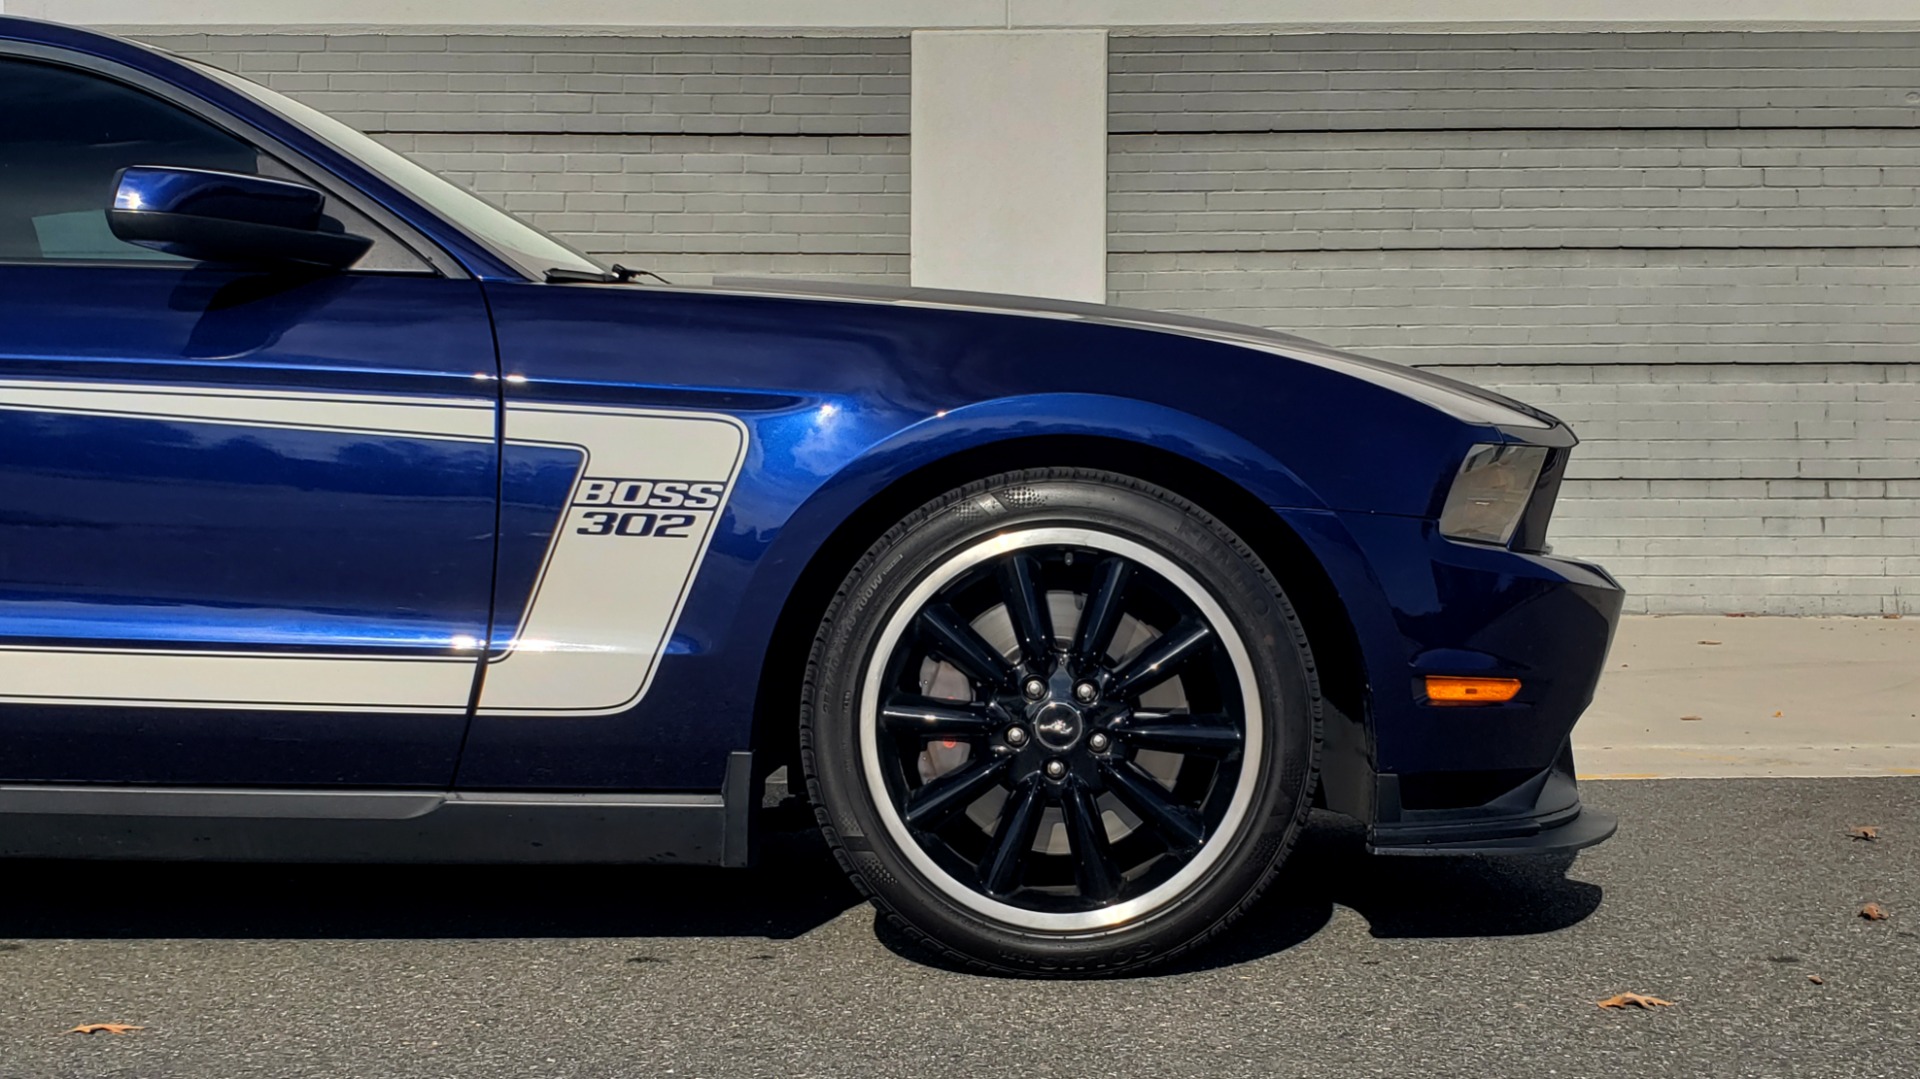 Used 2012 Ford MUSTANG BOSS 302 COUPE / 5.0L / 6-SPD MAN / RECARO SEATS / 3.73 GEARS for sale Sold at Formula Imports in Charlotte NC 28227 76